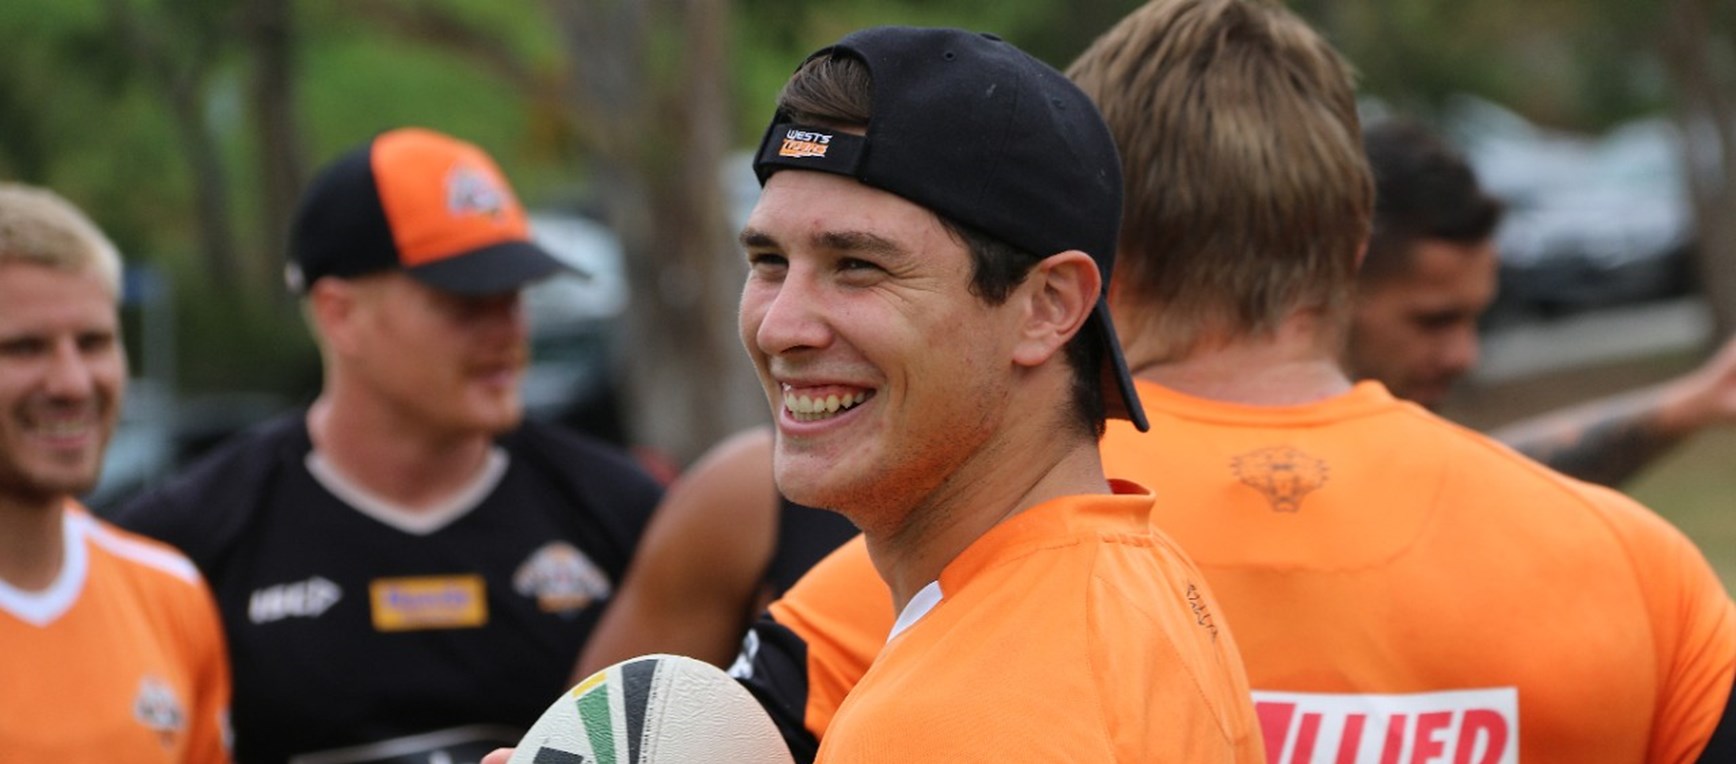 Gallery: Tough session at Leichhardt Oval